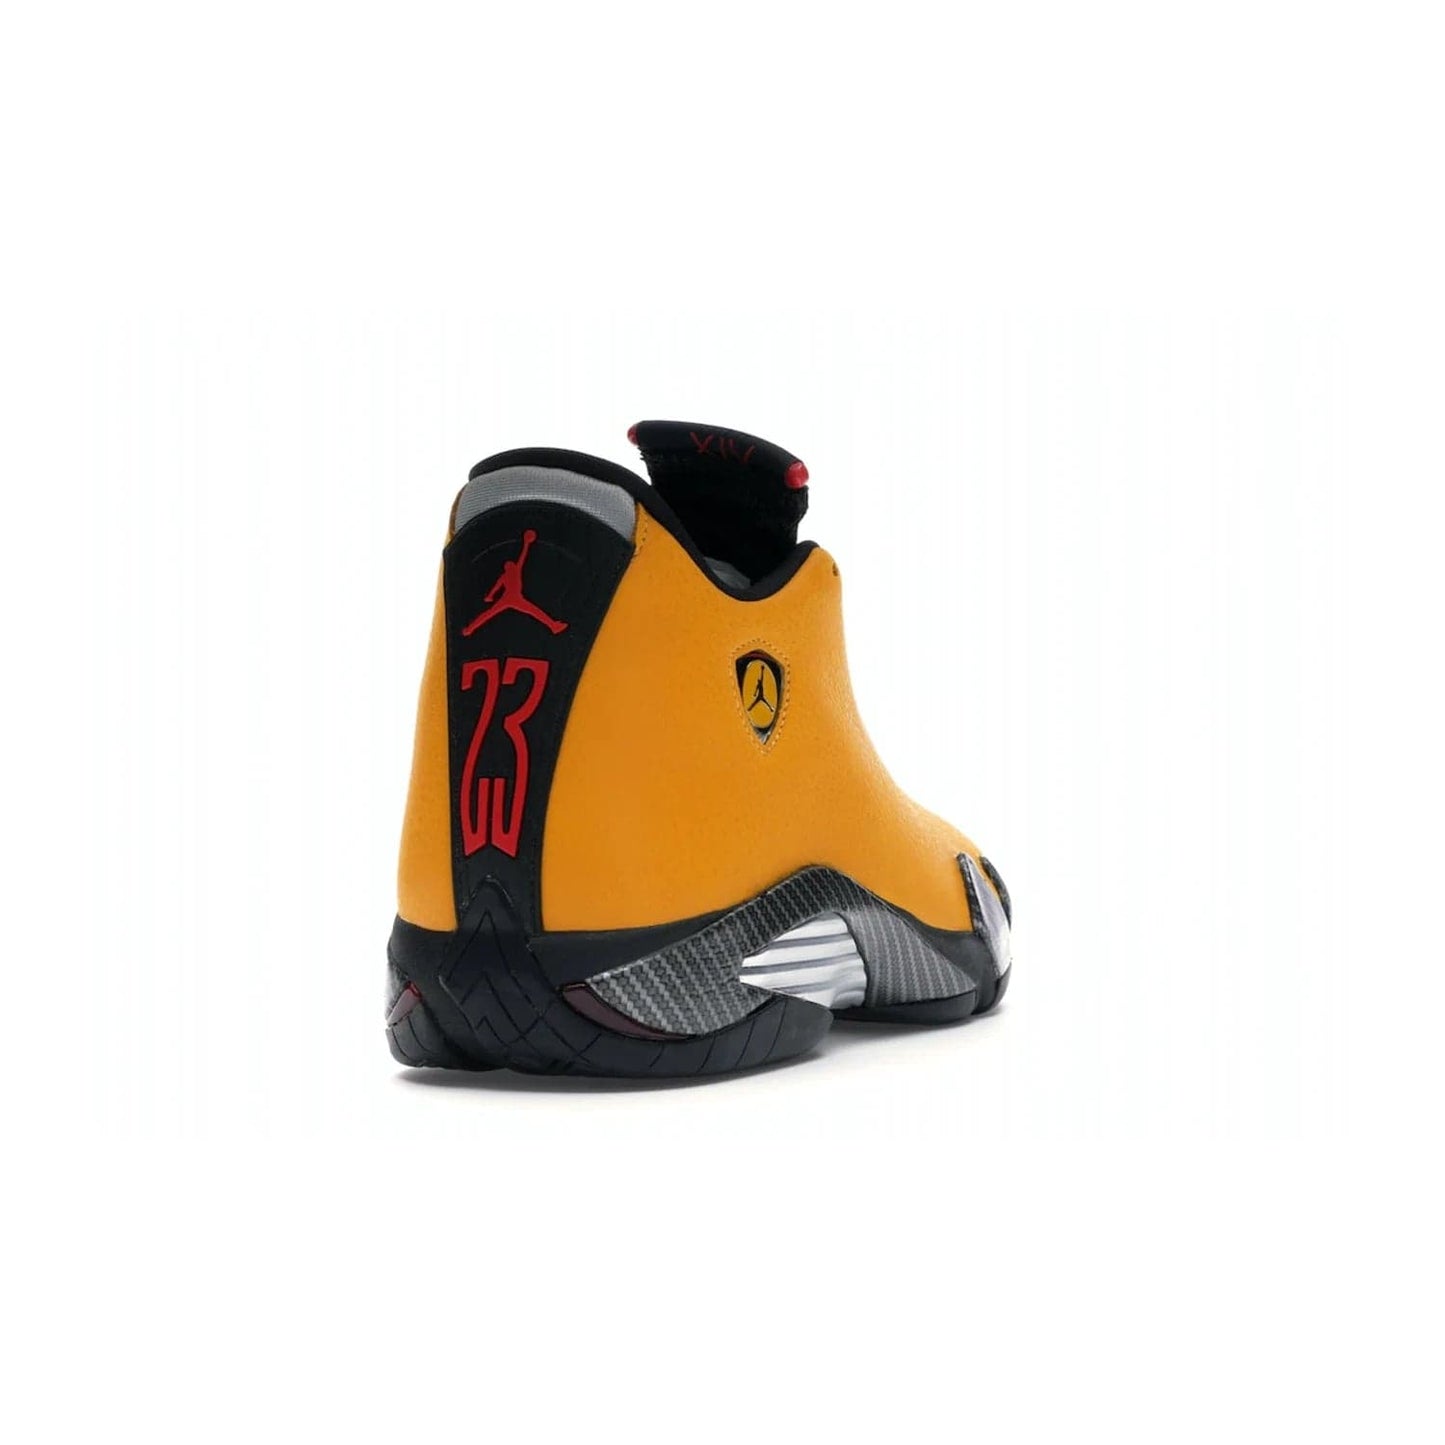 Jordan 14 Retro University Gold - Image 30 - Only at www.BallersClubKickz.com - Air Jordan 14 Retro University Gold: High-quality leather sneaker with Jumpman, tongue & heel logos. Zoom Air units & herringbone traction for superior comfort. University Gold outsole for stylish streetwear.